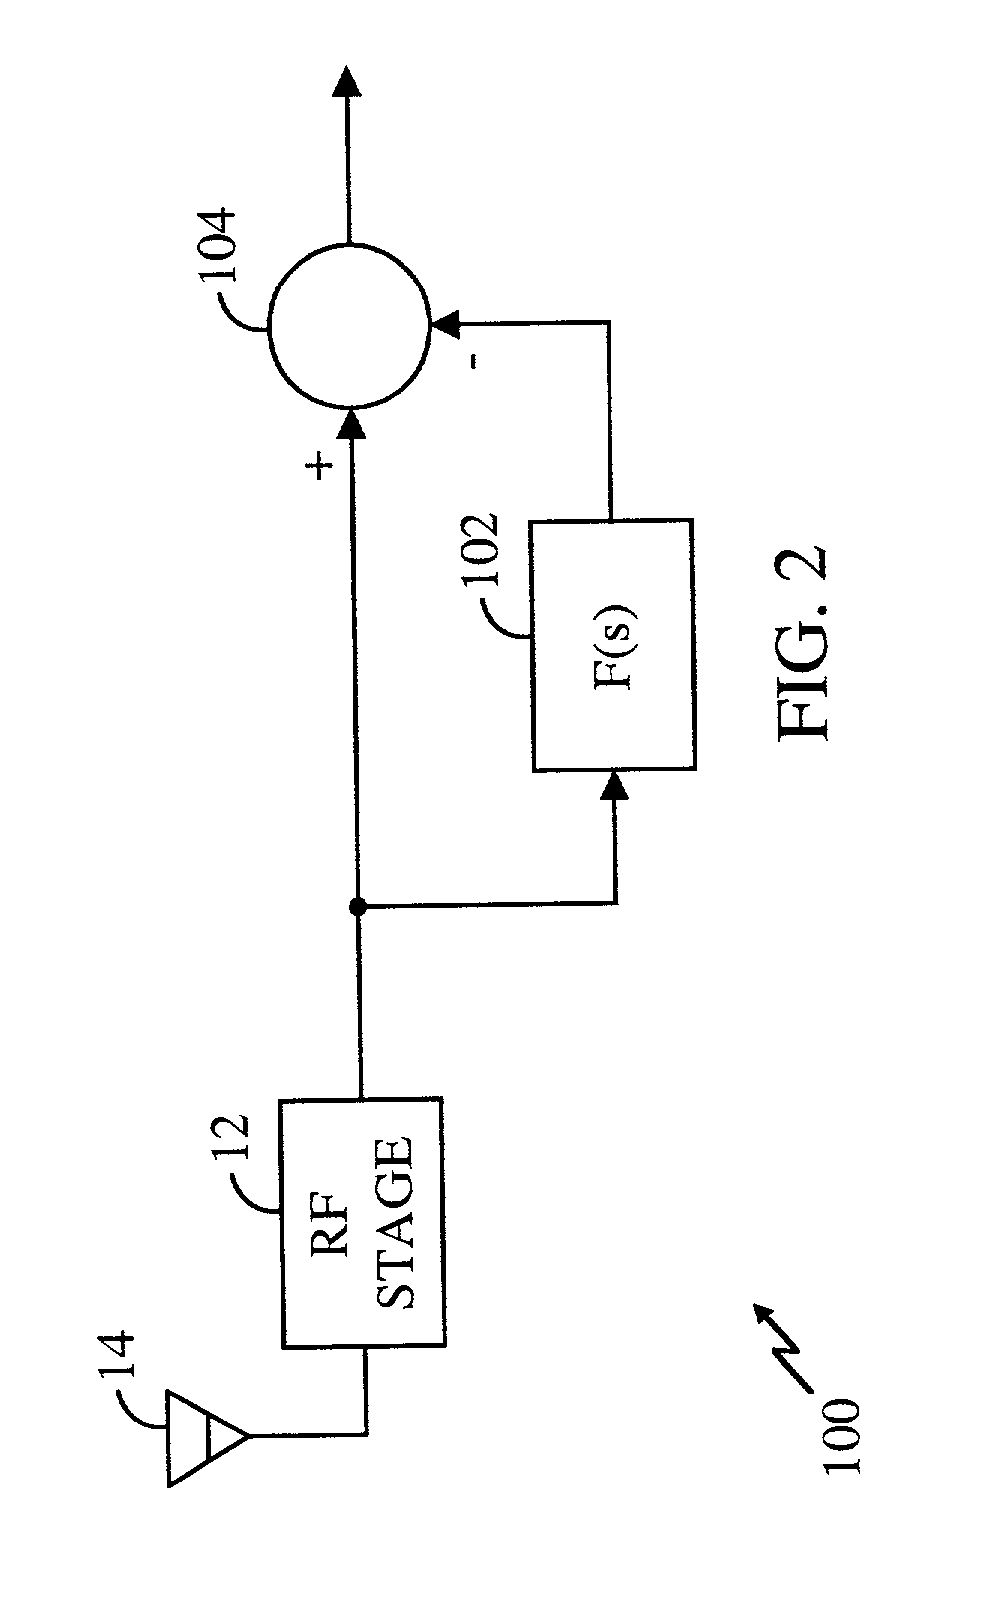 Distortion reduction in a wireless communication device